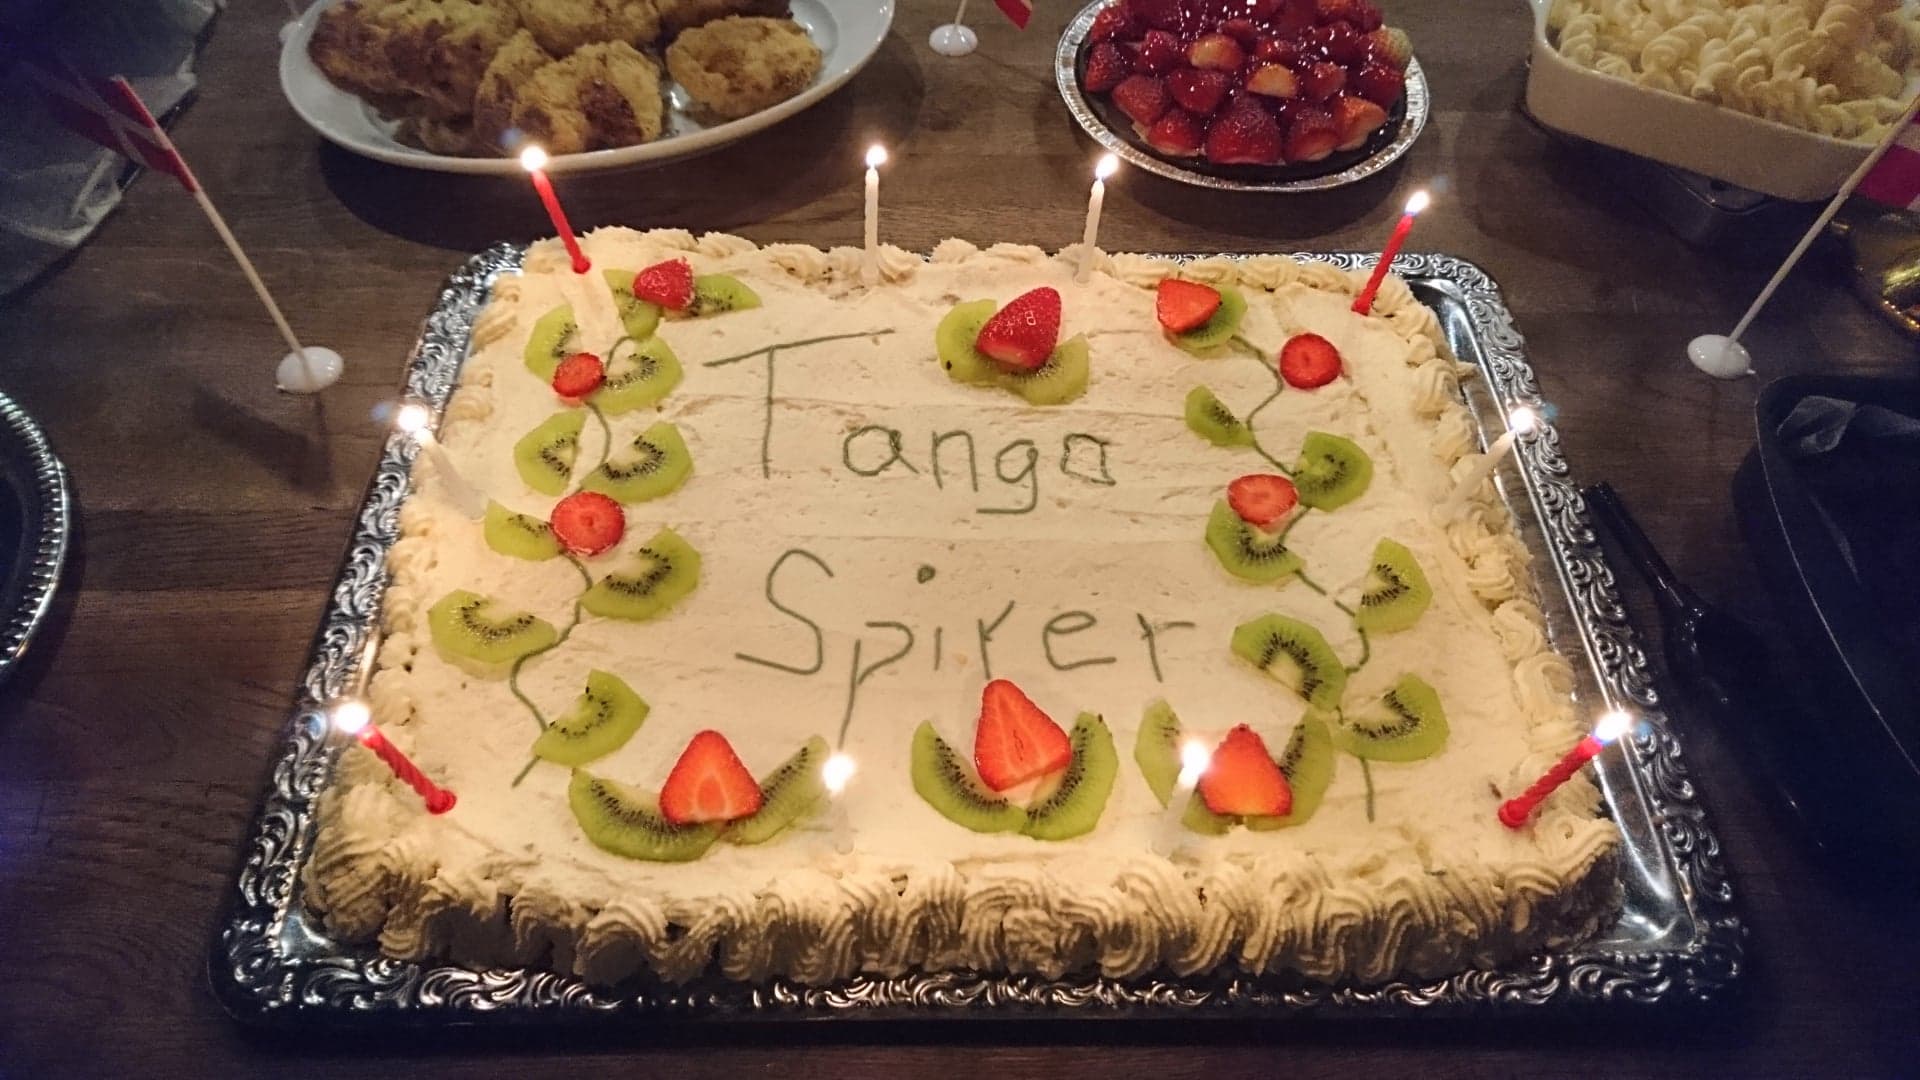 Tango Sprouts 3 years birthday party